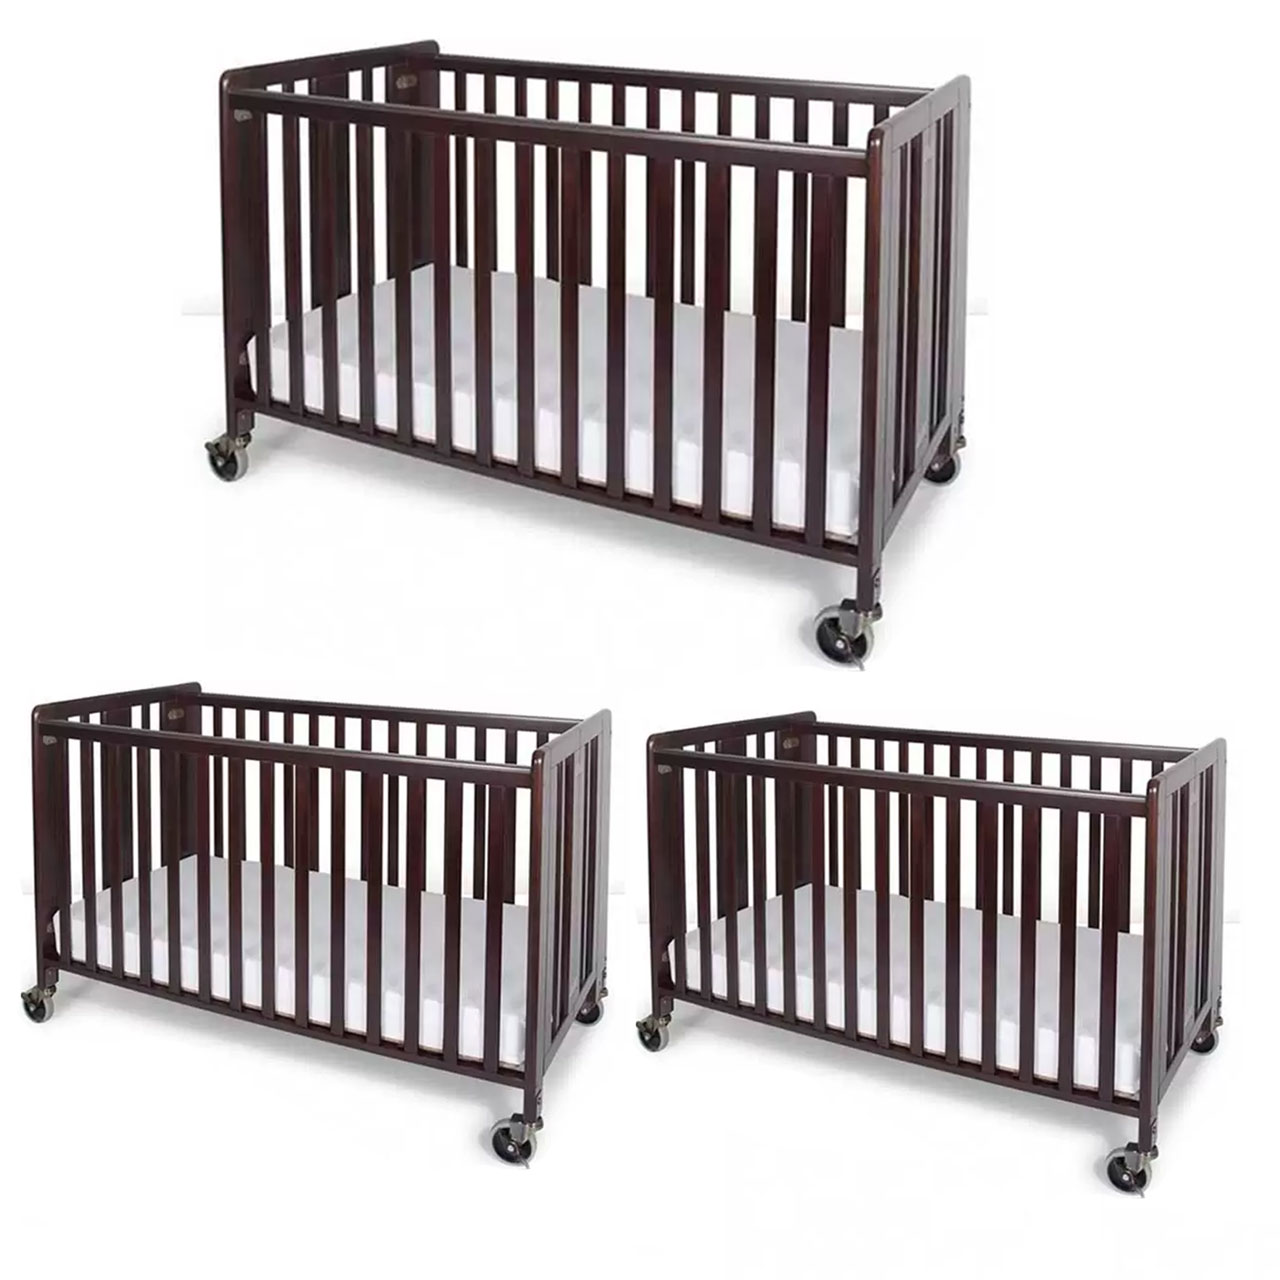 PACKAGE 27 (3 FULL SIZE CRIBS WITH MATTRESS AND SHEETS)